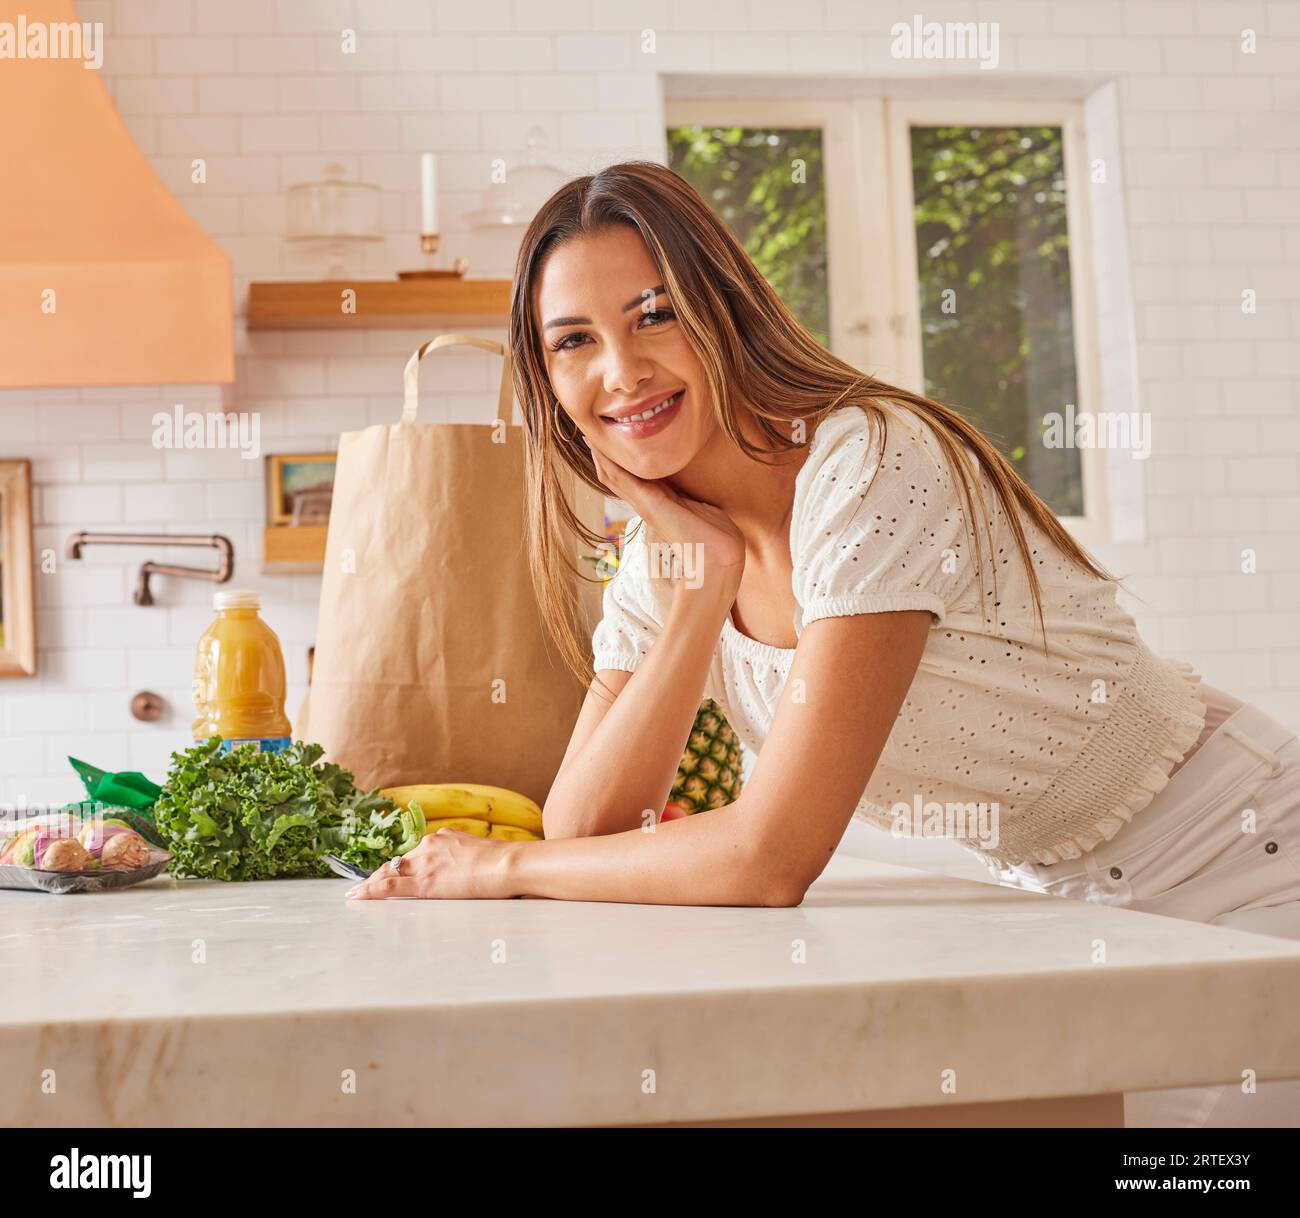 Portrait of smiling woman with paper shopping bag and groceries in kitchen Stock Photo